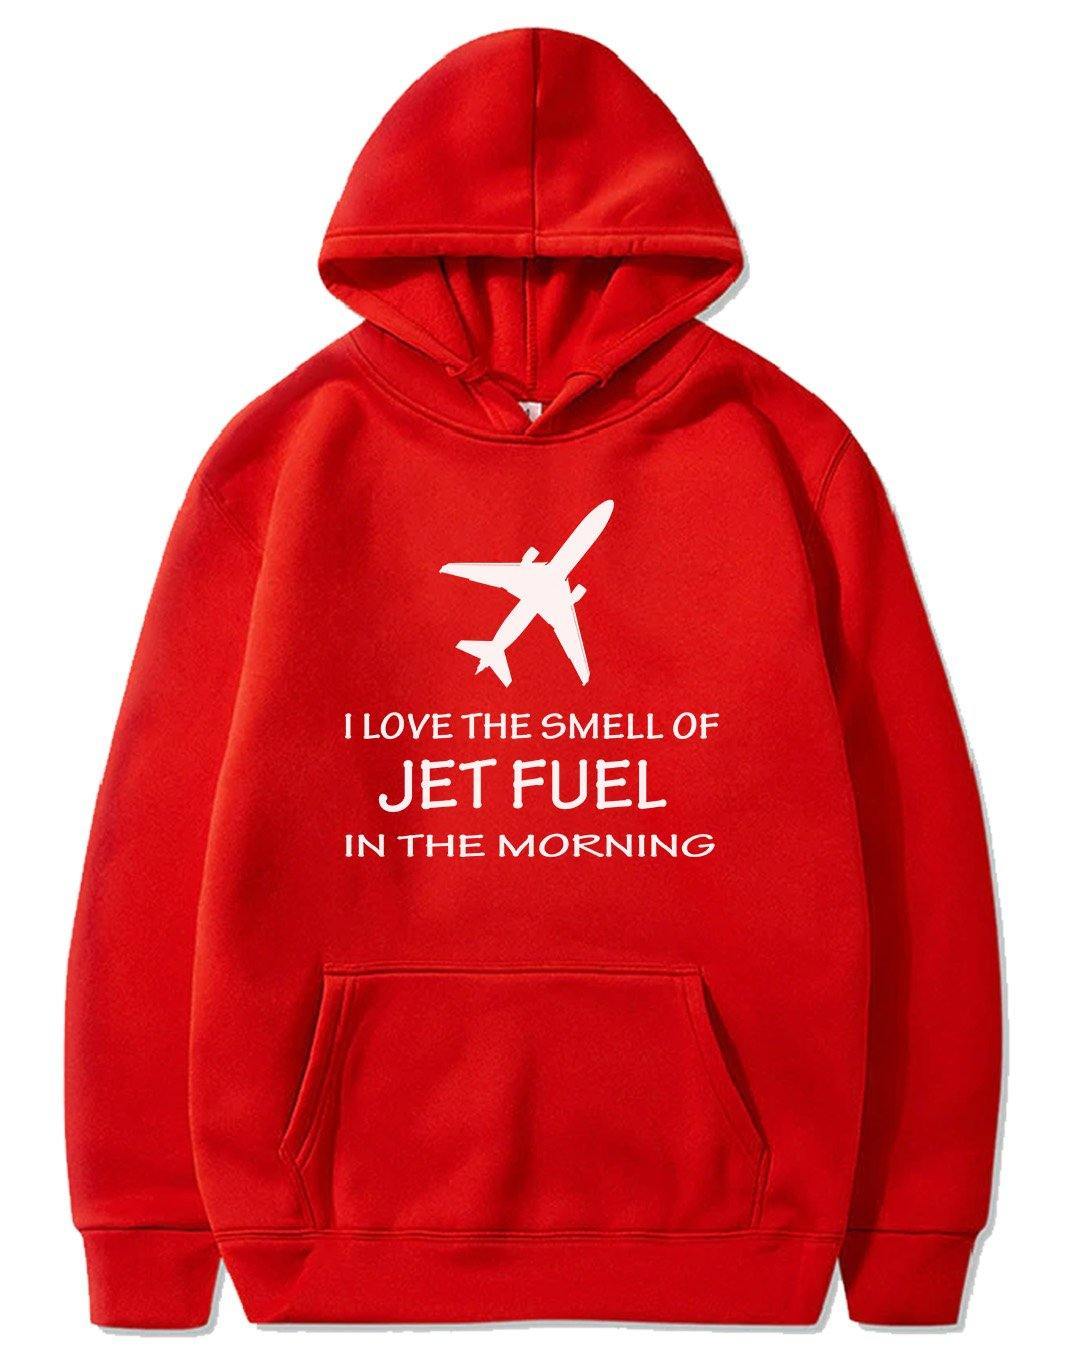 I LOVE THE SMELL OF JET FUEL IN THE MORNING PULLOVER THE AV8R